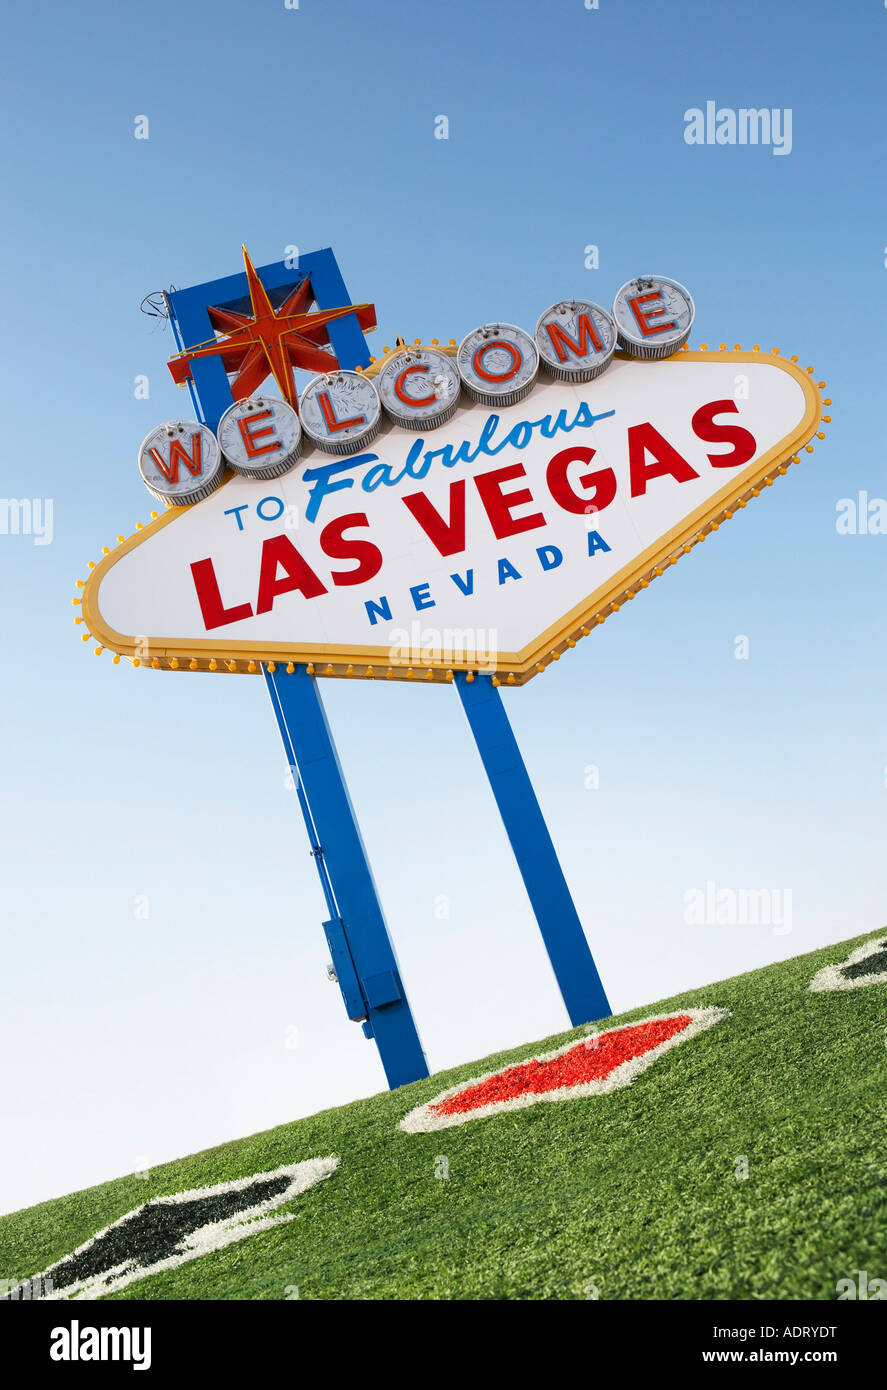 Welcome to Las Vegas sign with playing card suits in grass Stock Photo